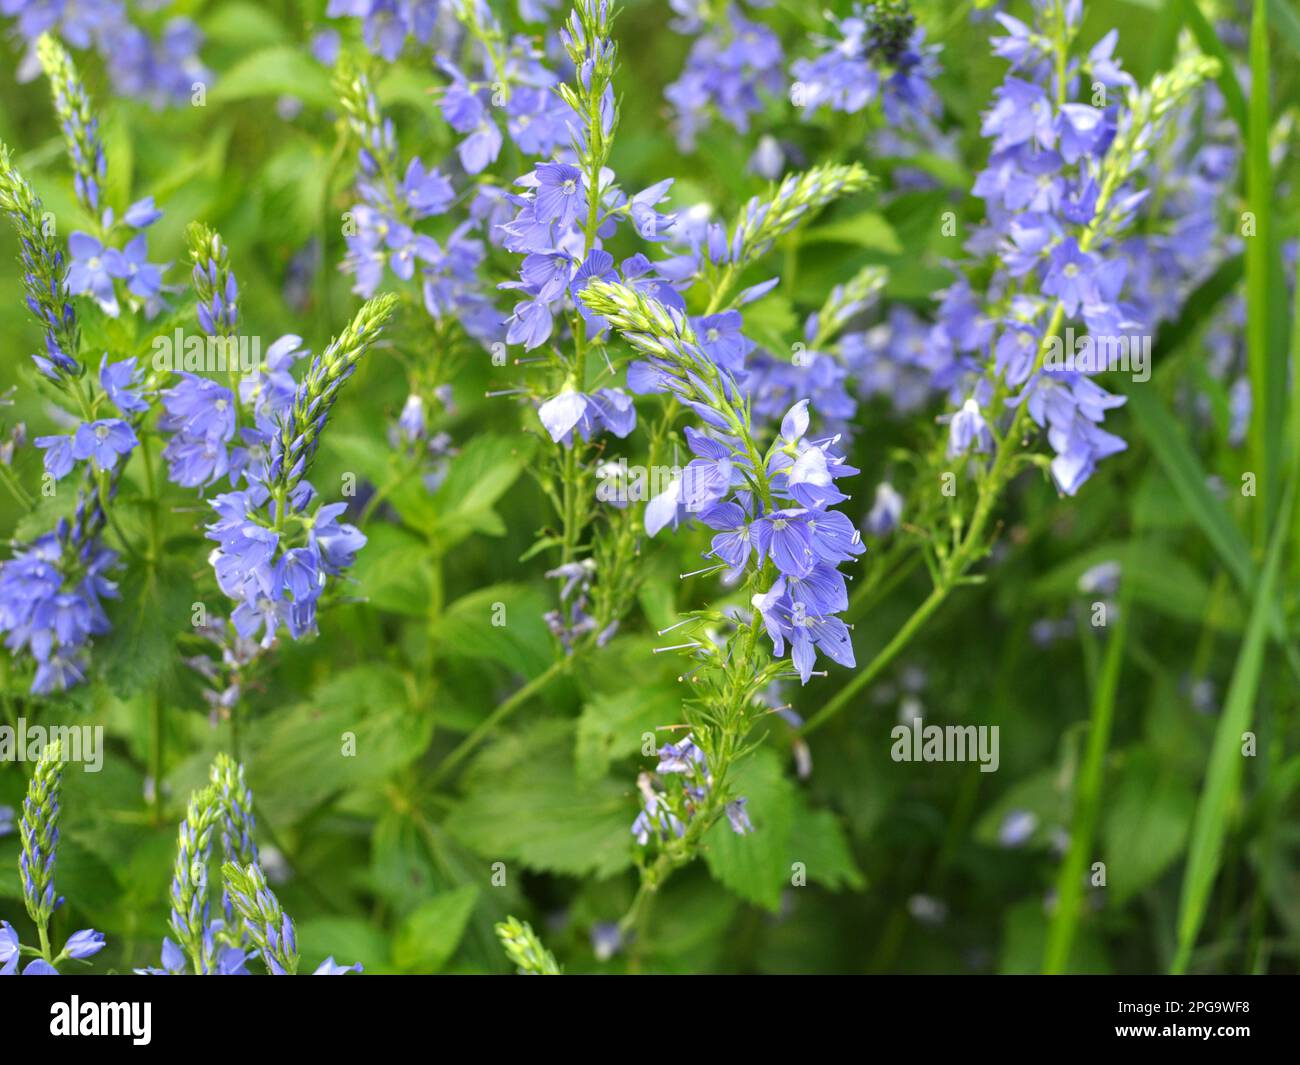 In the wild, veronica teucrium grows among grasses Stock Photo